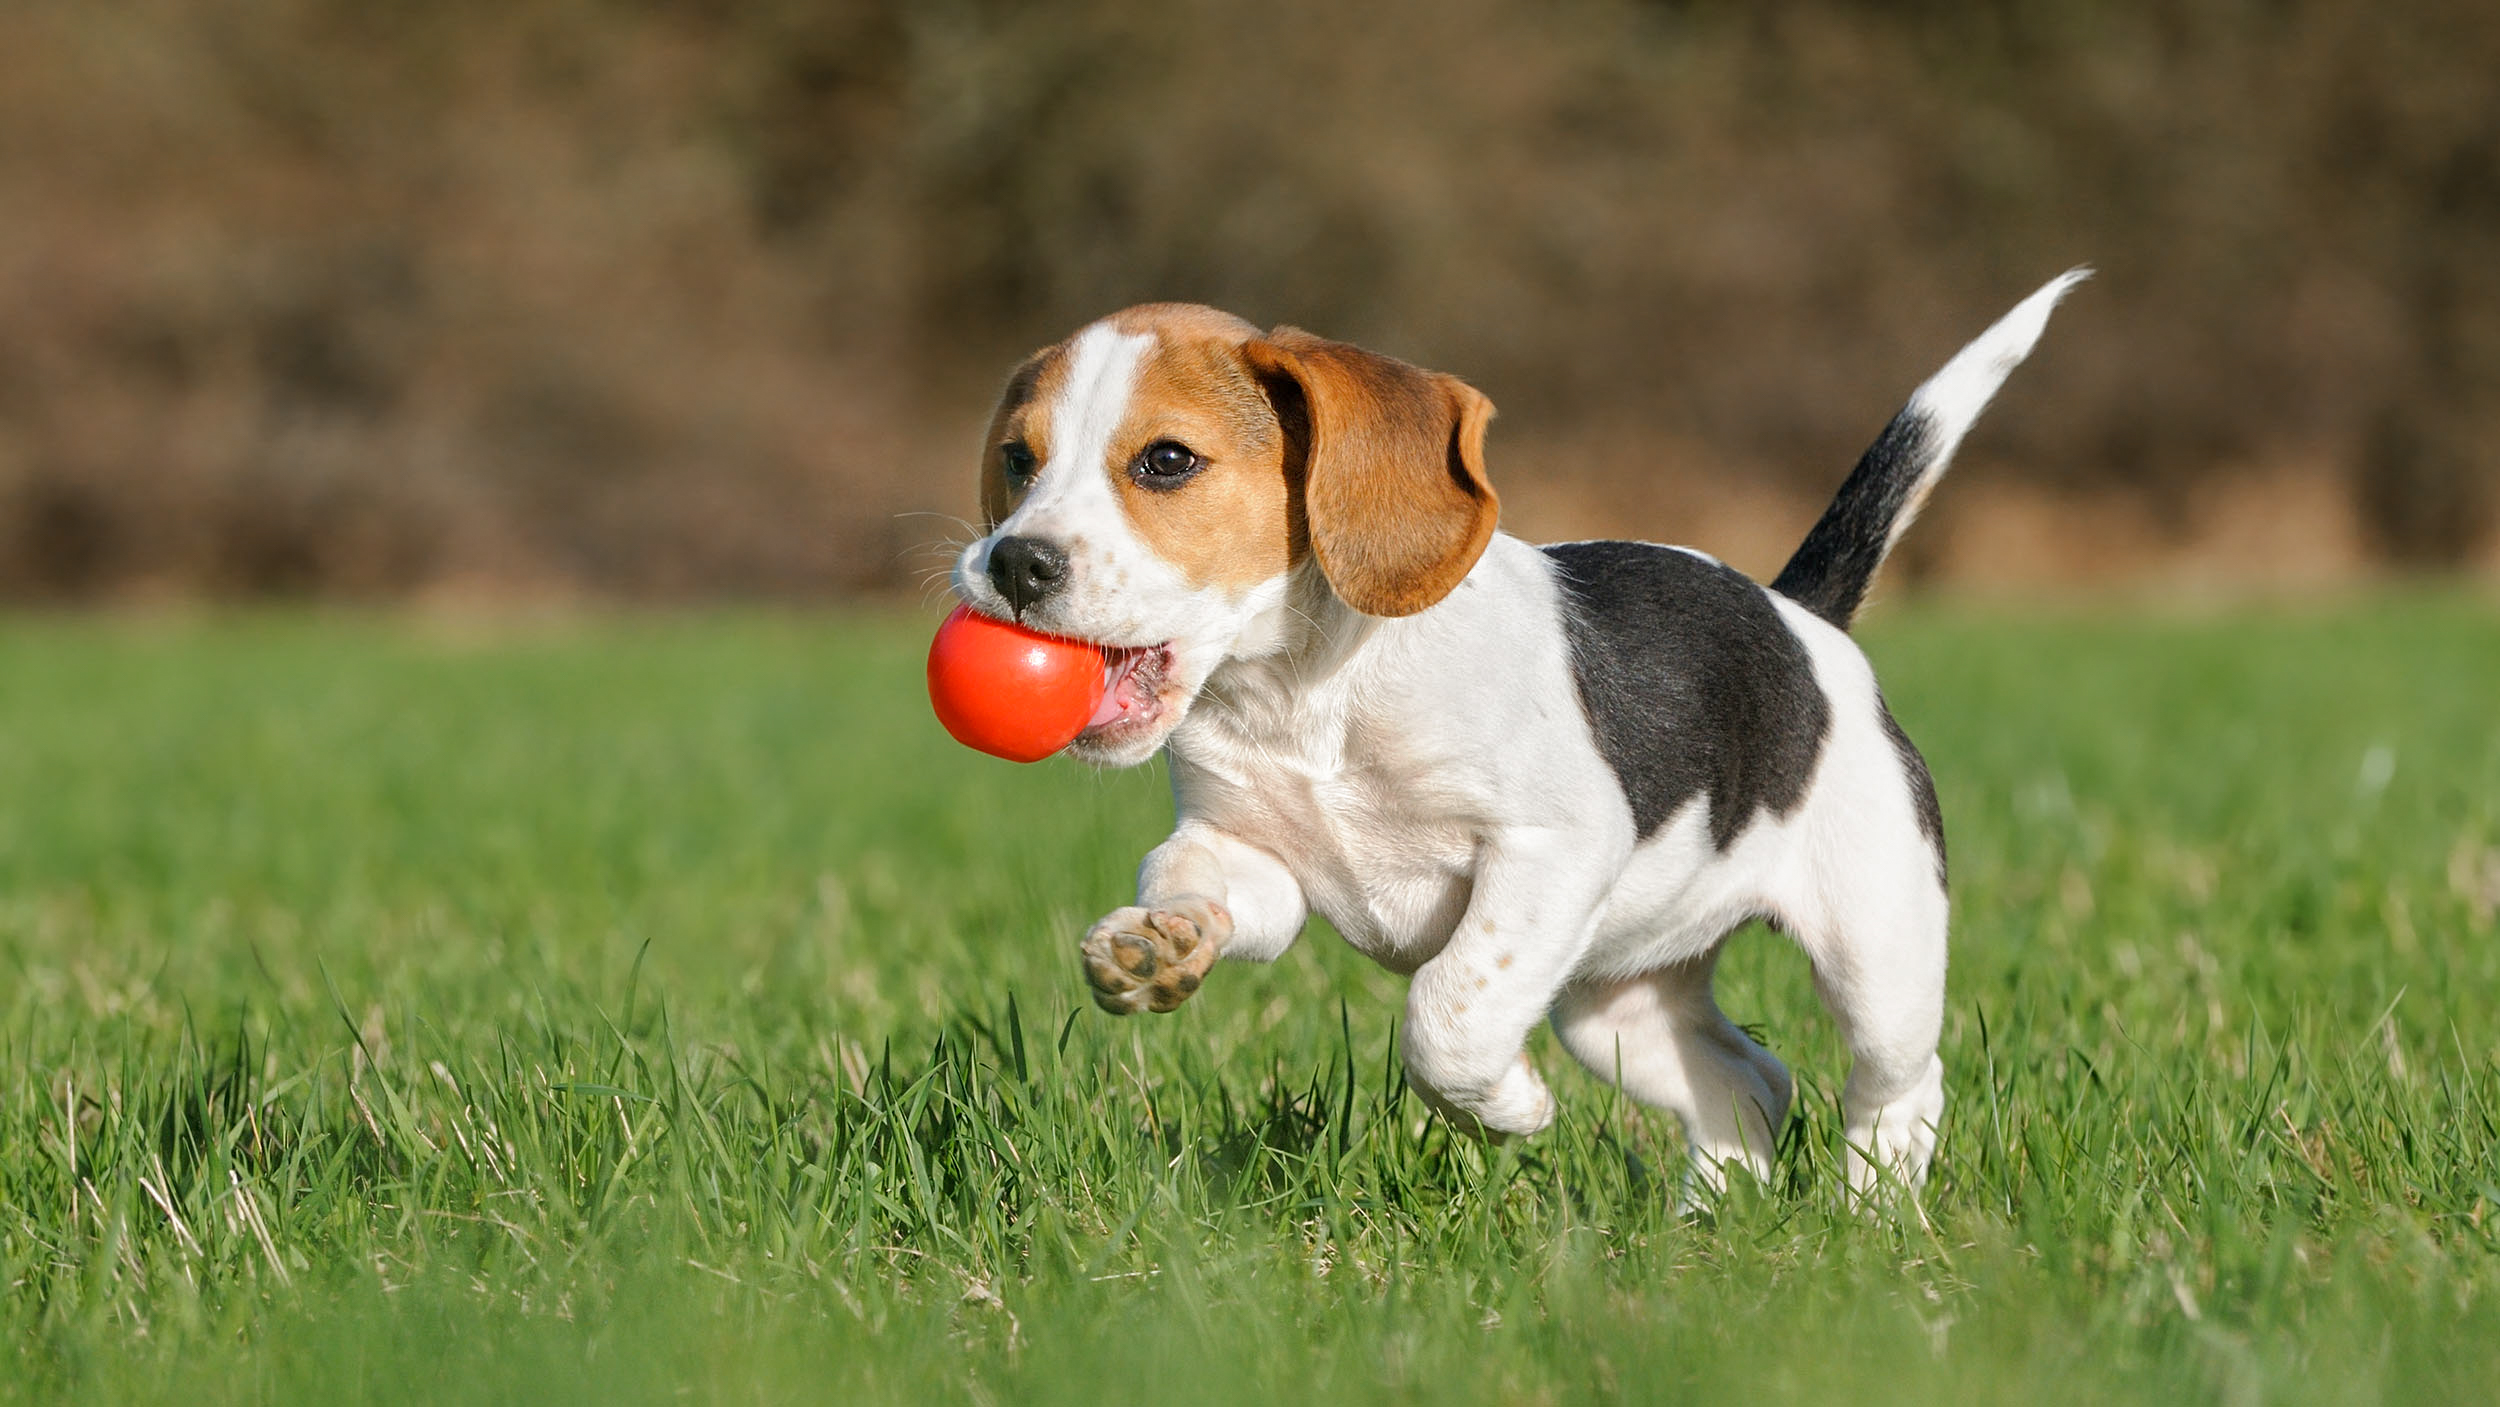 Puppy Beagle running outdoors with a red ball in its mouth.